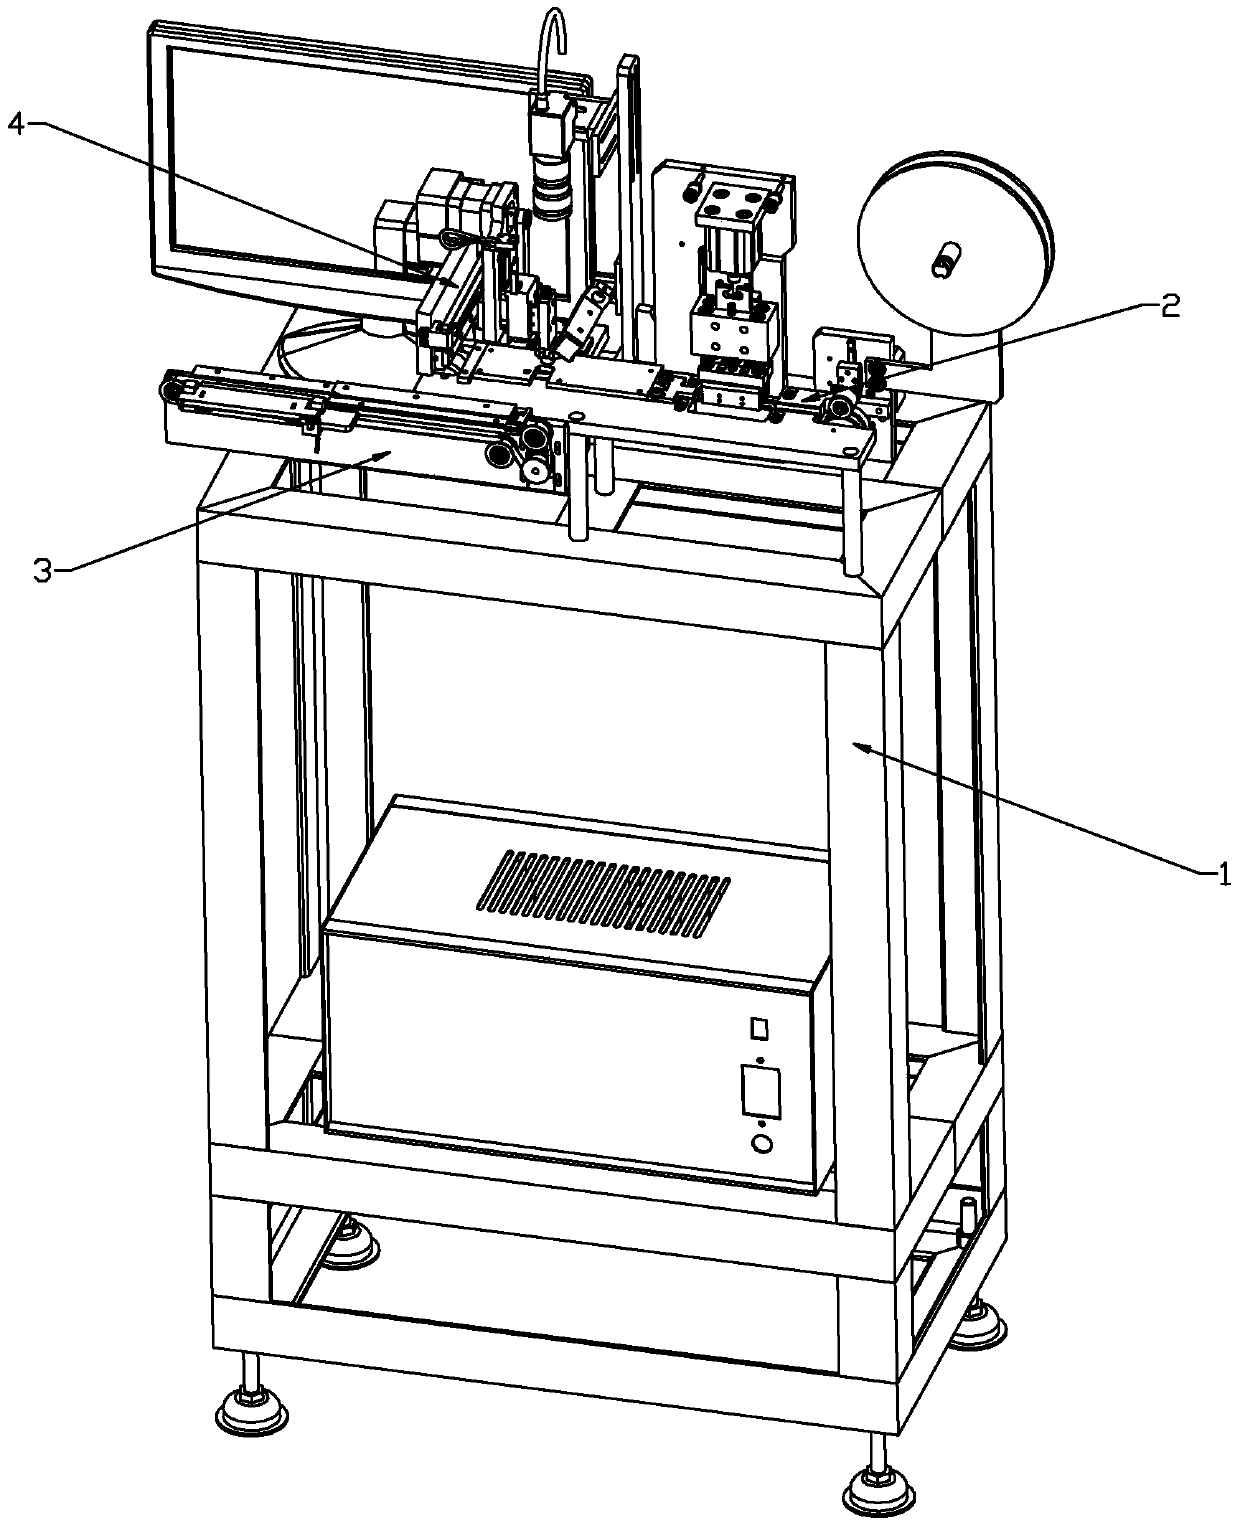 Continuous packaging machine